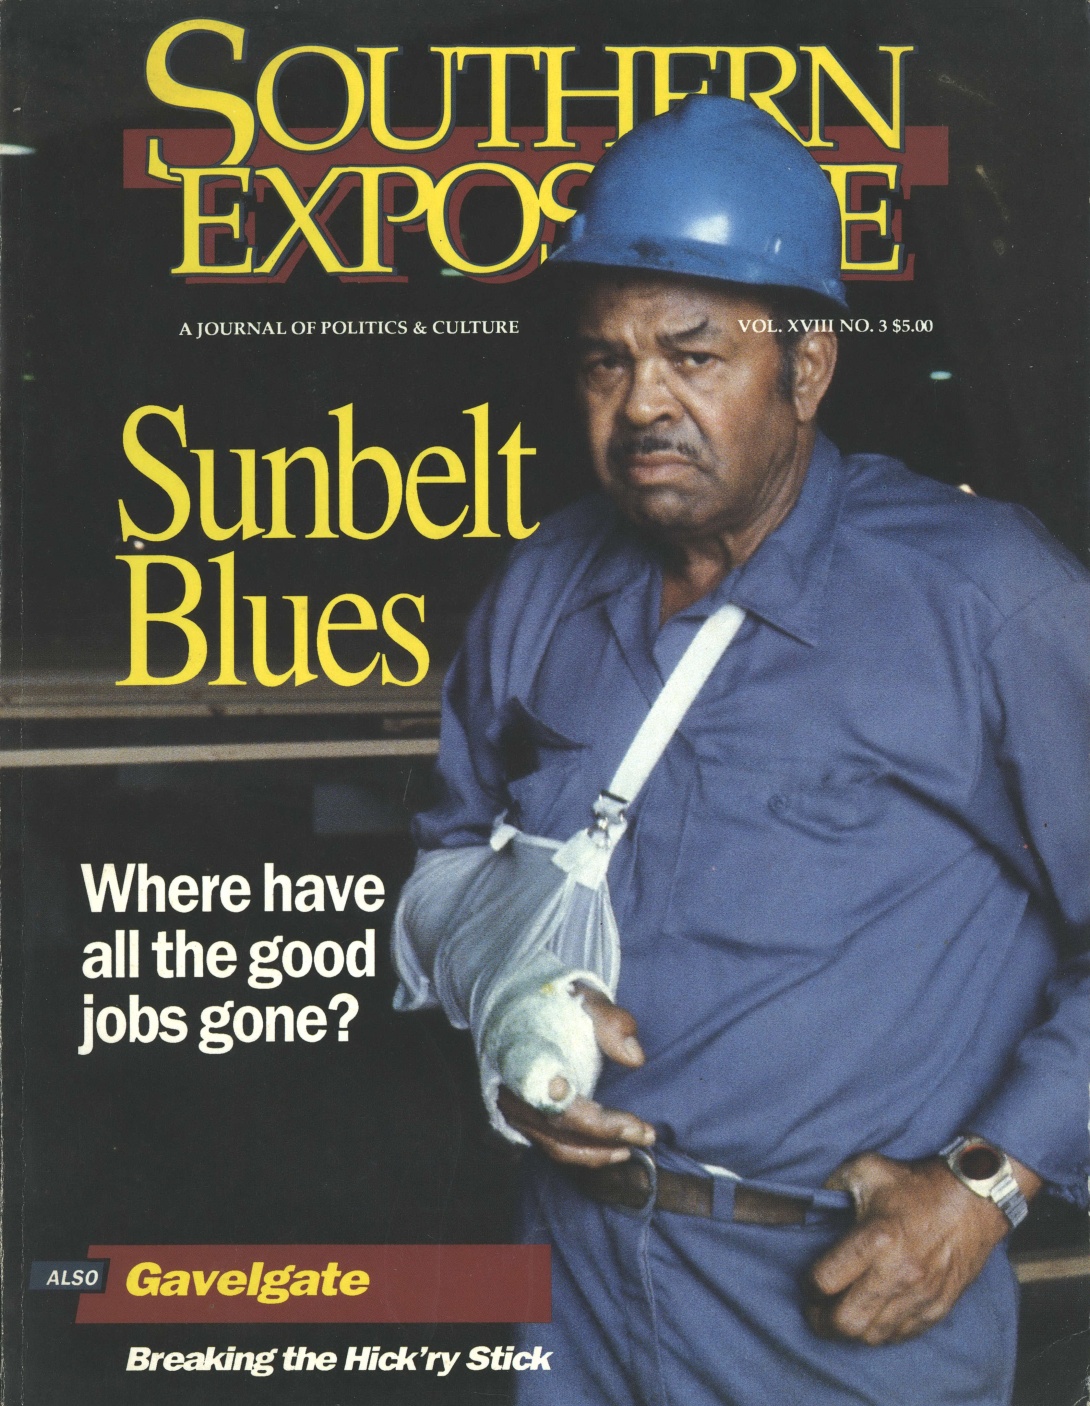 Magazine cover with photo of man in hard hat and right arm in cast, reading "Sunbelt Blues: where have all the good jobs gone?"